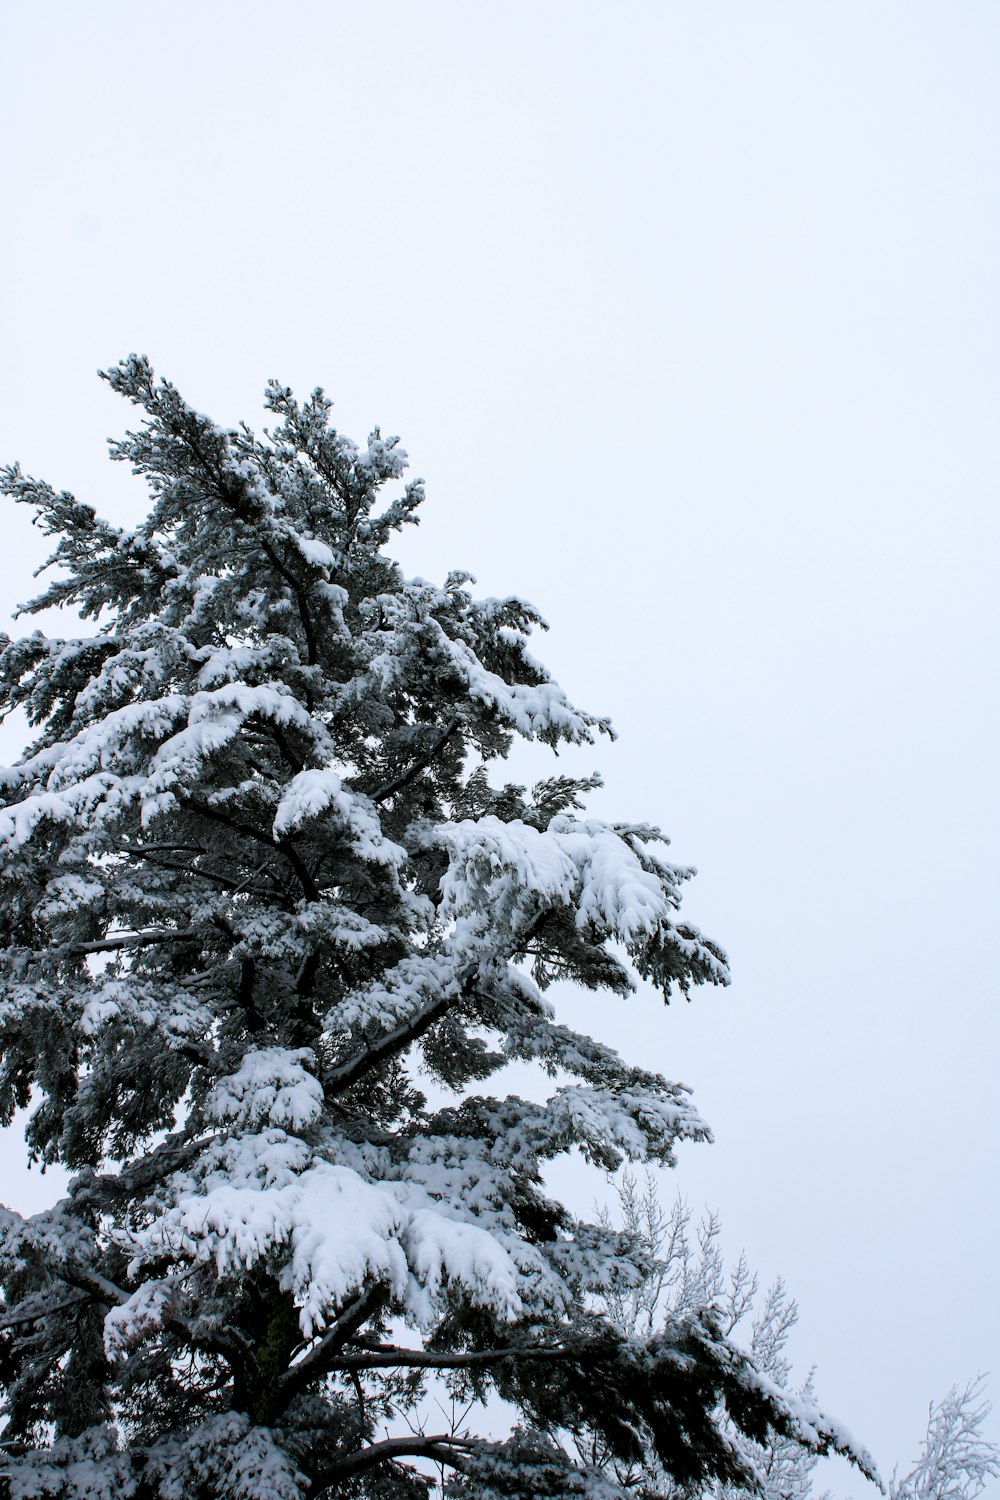 a large pine tree covered in snow on a snowy day